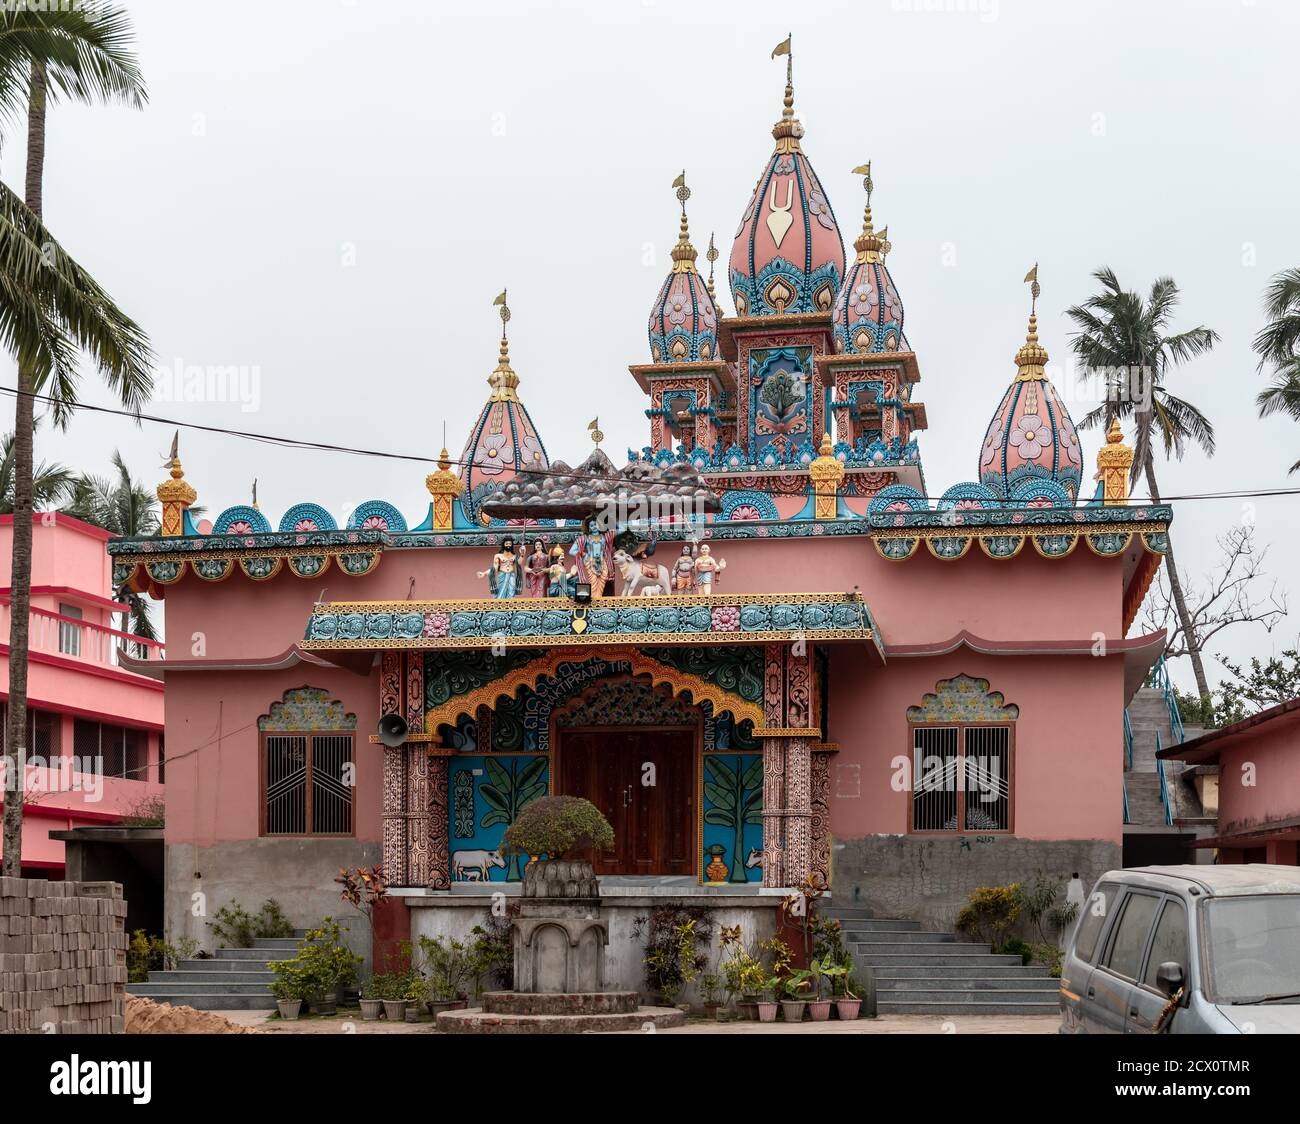 Puri, India - February 3, 2020: A pink and blue decorative hindu temple against the sky on February 3, 2020 in Puri, India Stock Photo